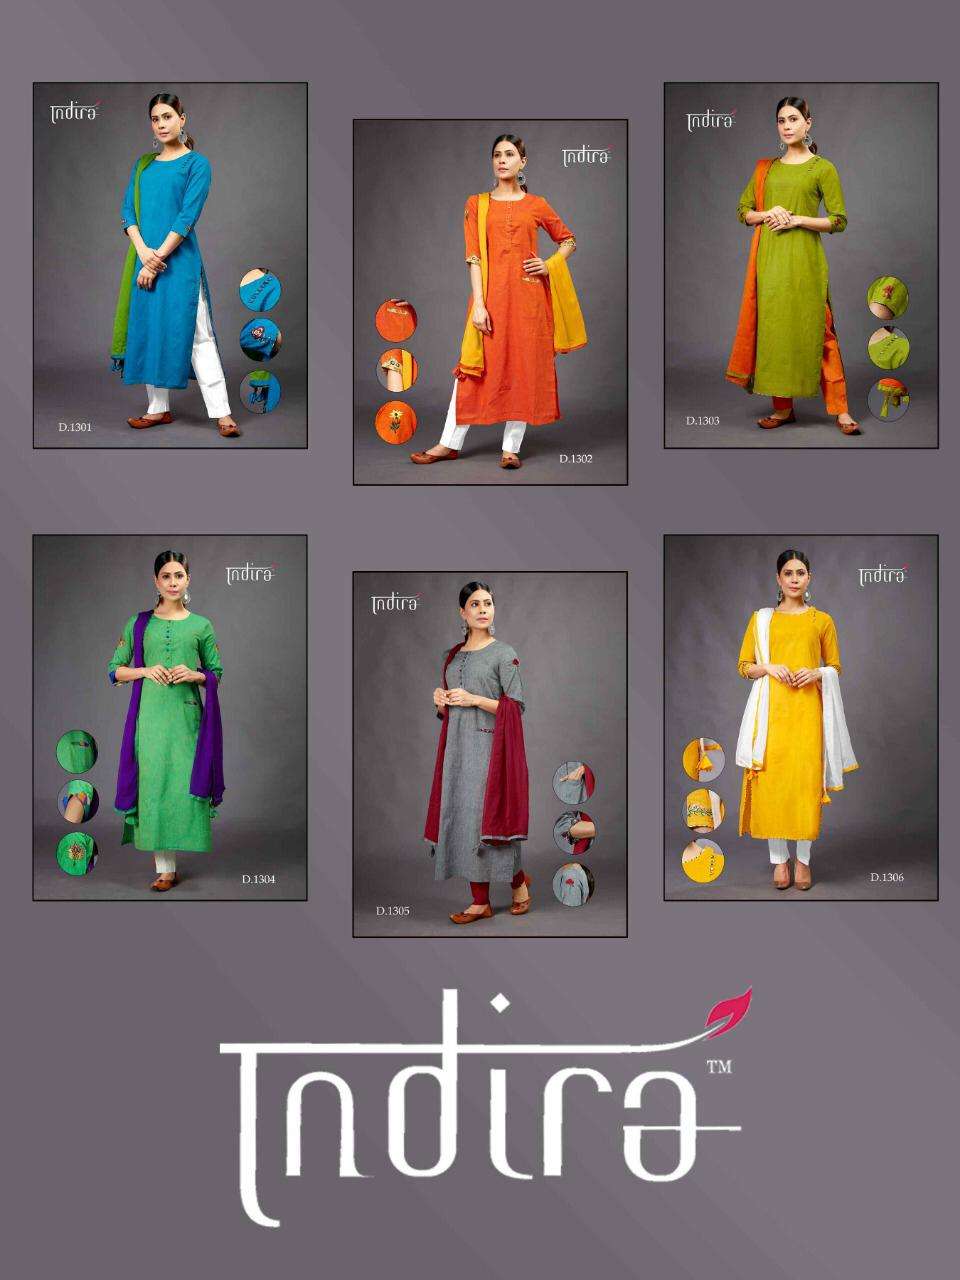 SADA BAHAR BY INDIRA 1301 TO 1306 SERIES BEAUTIFUL COLORFUL STYLISH FANCY CASUAL WEAR & ETHNIC WEAR & READY TO WEAR PURE SUMMER COTTON KURTIS WITH DUPATTA AT WHOLESALE PRICE